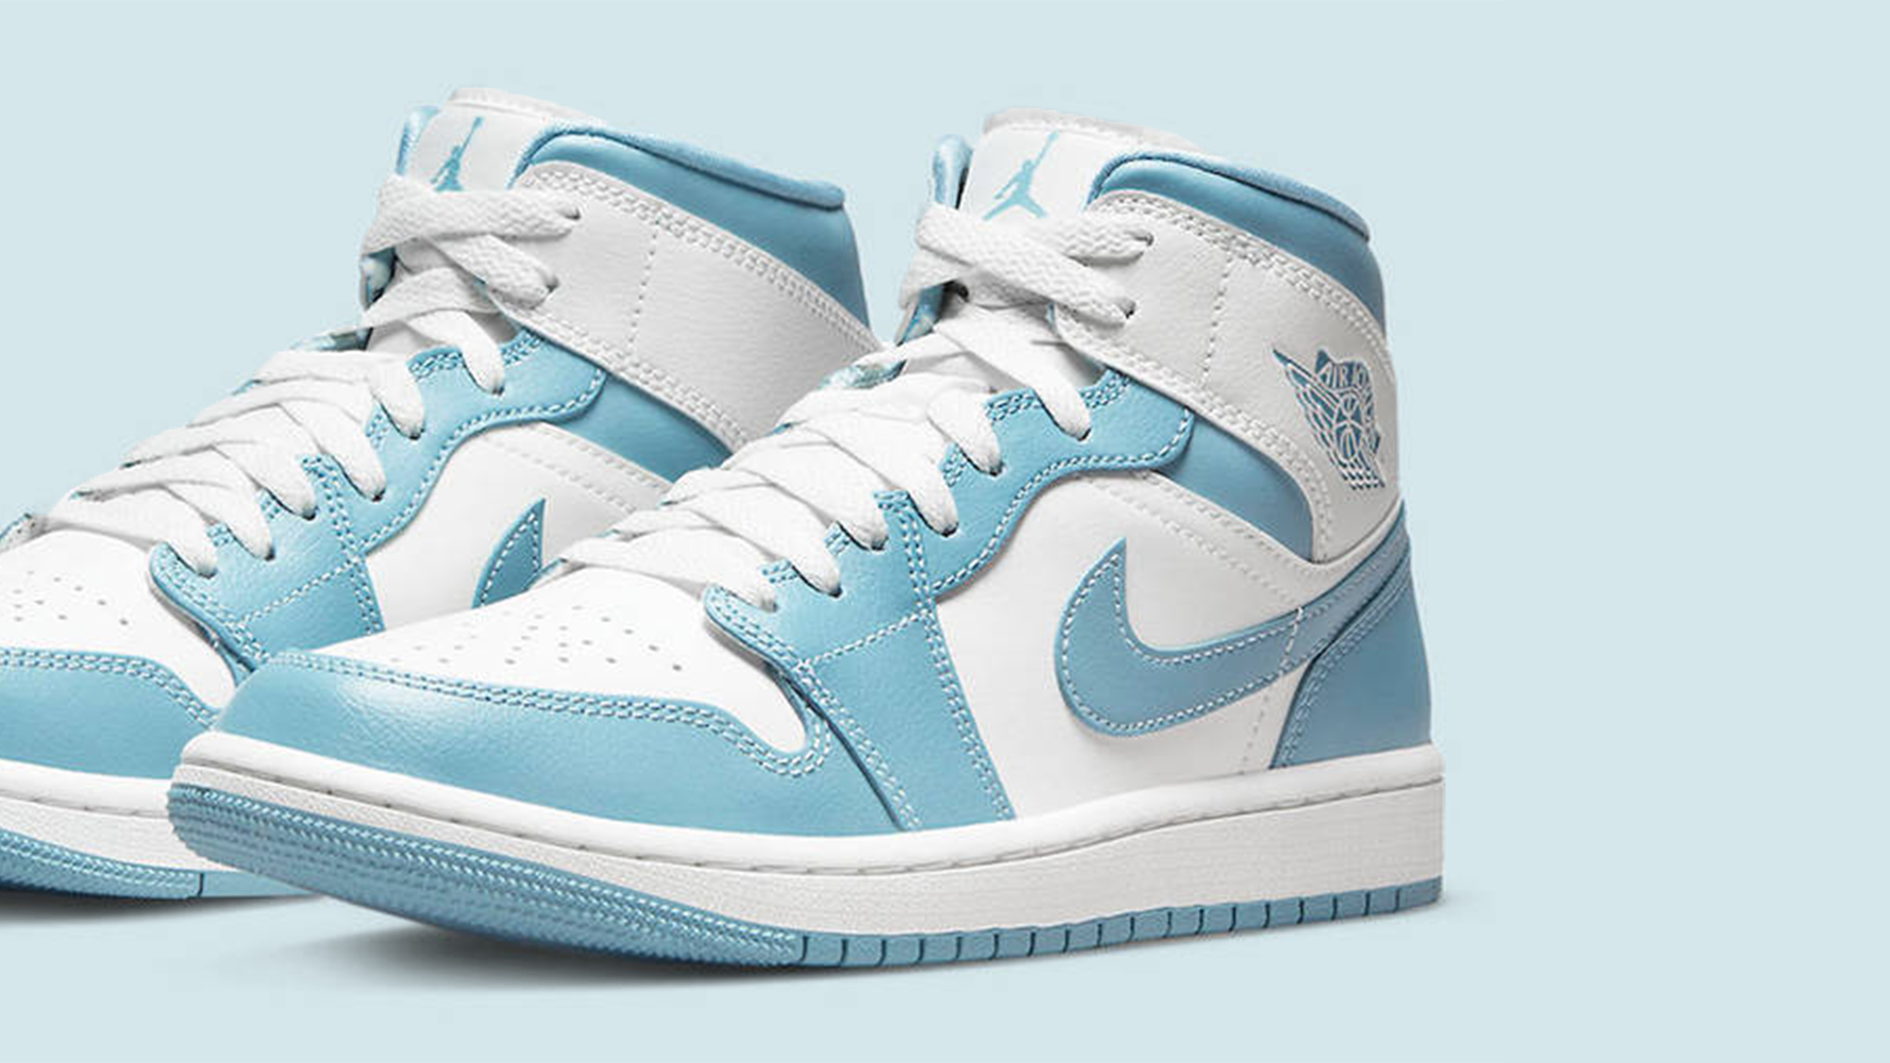 UNC-Inspired Hues Dress This Latest Air Jordan 1 Mid | The Sole